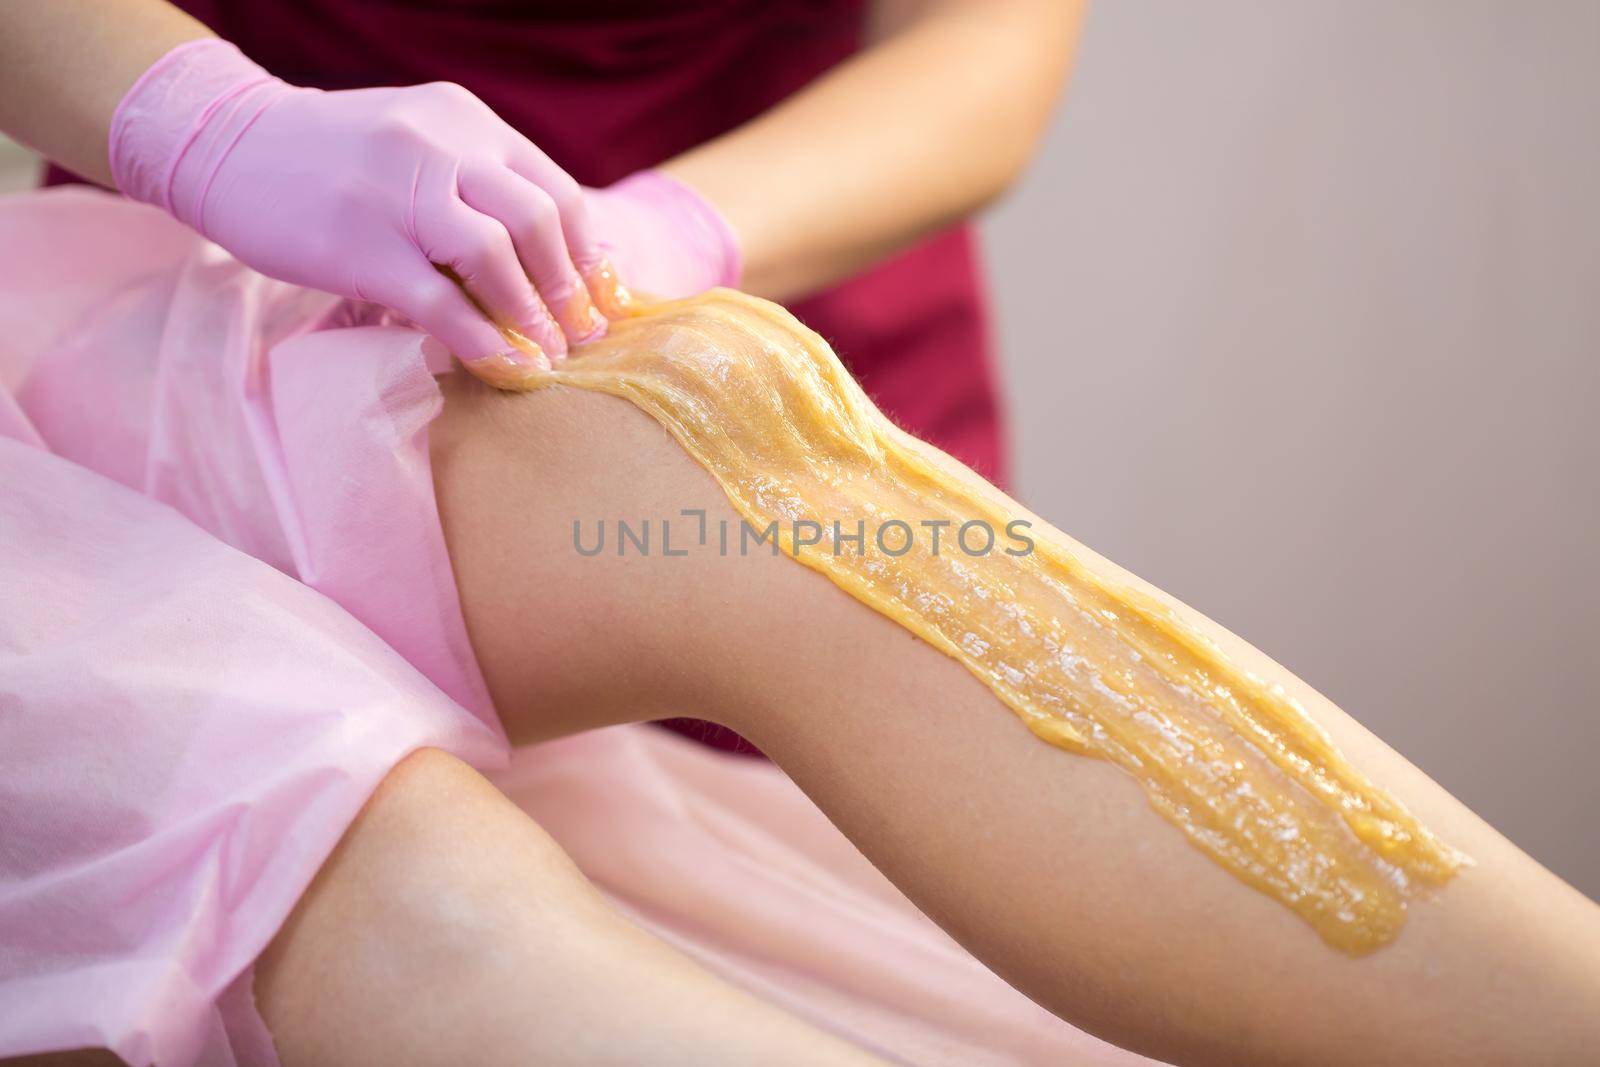 Sugar depilation of the feet in the beauty salon. Rid of hair on the legs. Sugaring. Master shugaring applies thick sugar paste on the legs of a young girl, removing hair on the legs. Close-up.